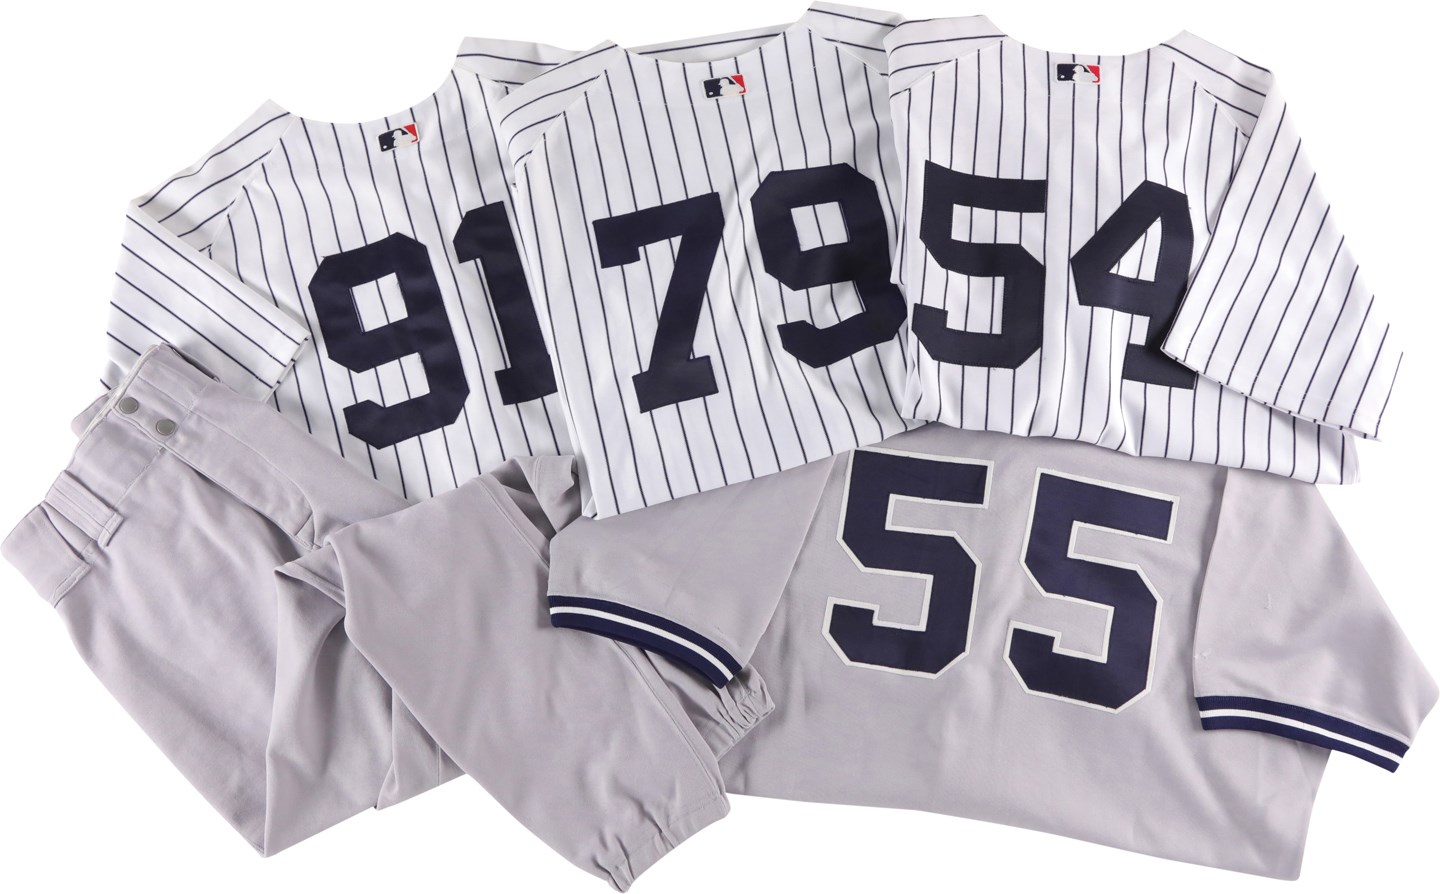 - 1993-2004 New York Yankees Game Worn & Issued Jersey Collection - Most Steiner Certified (9)